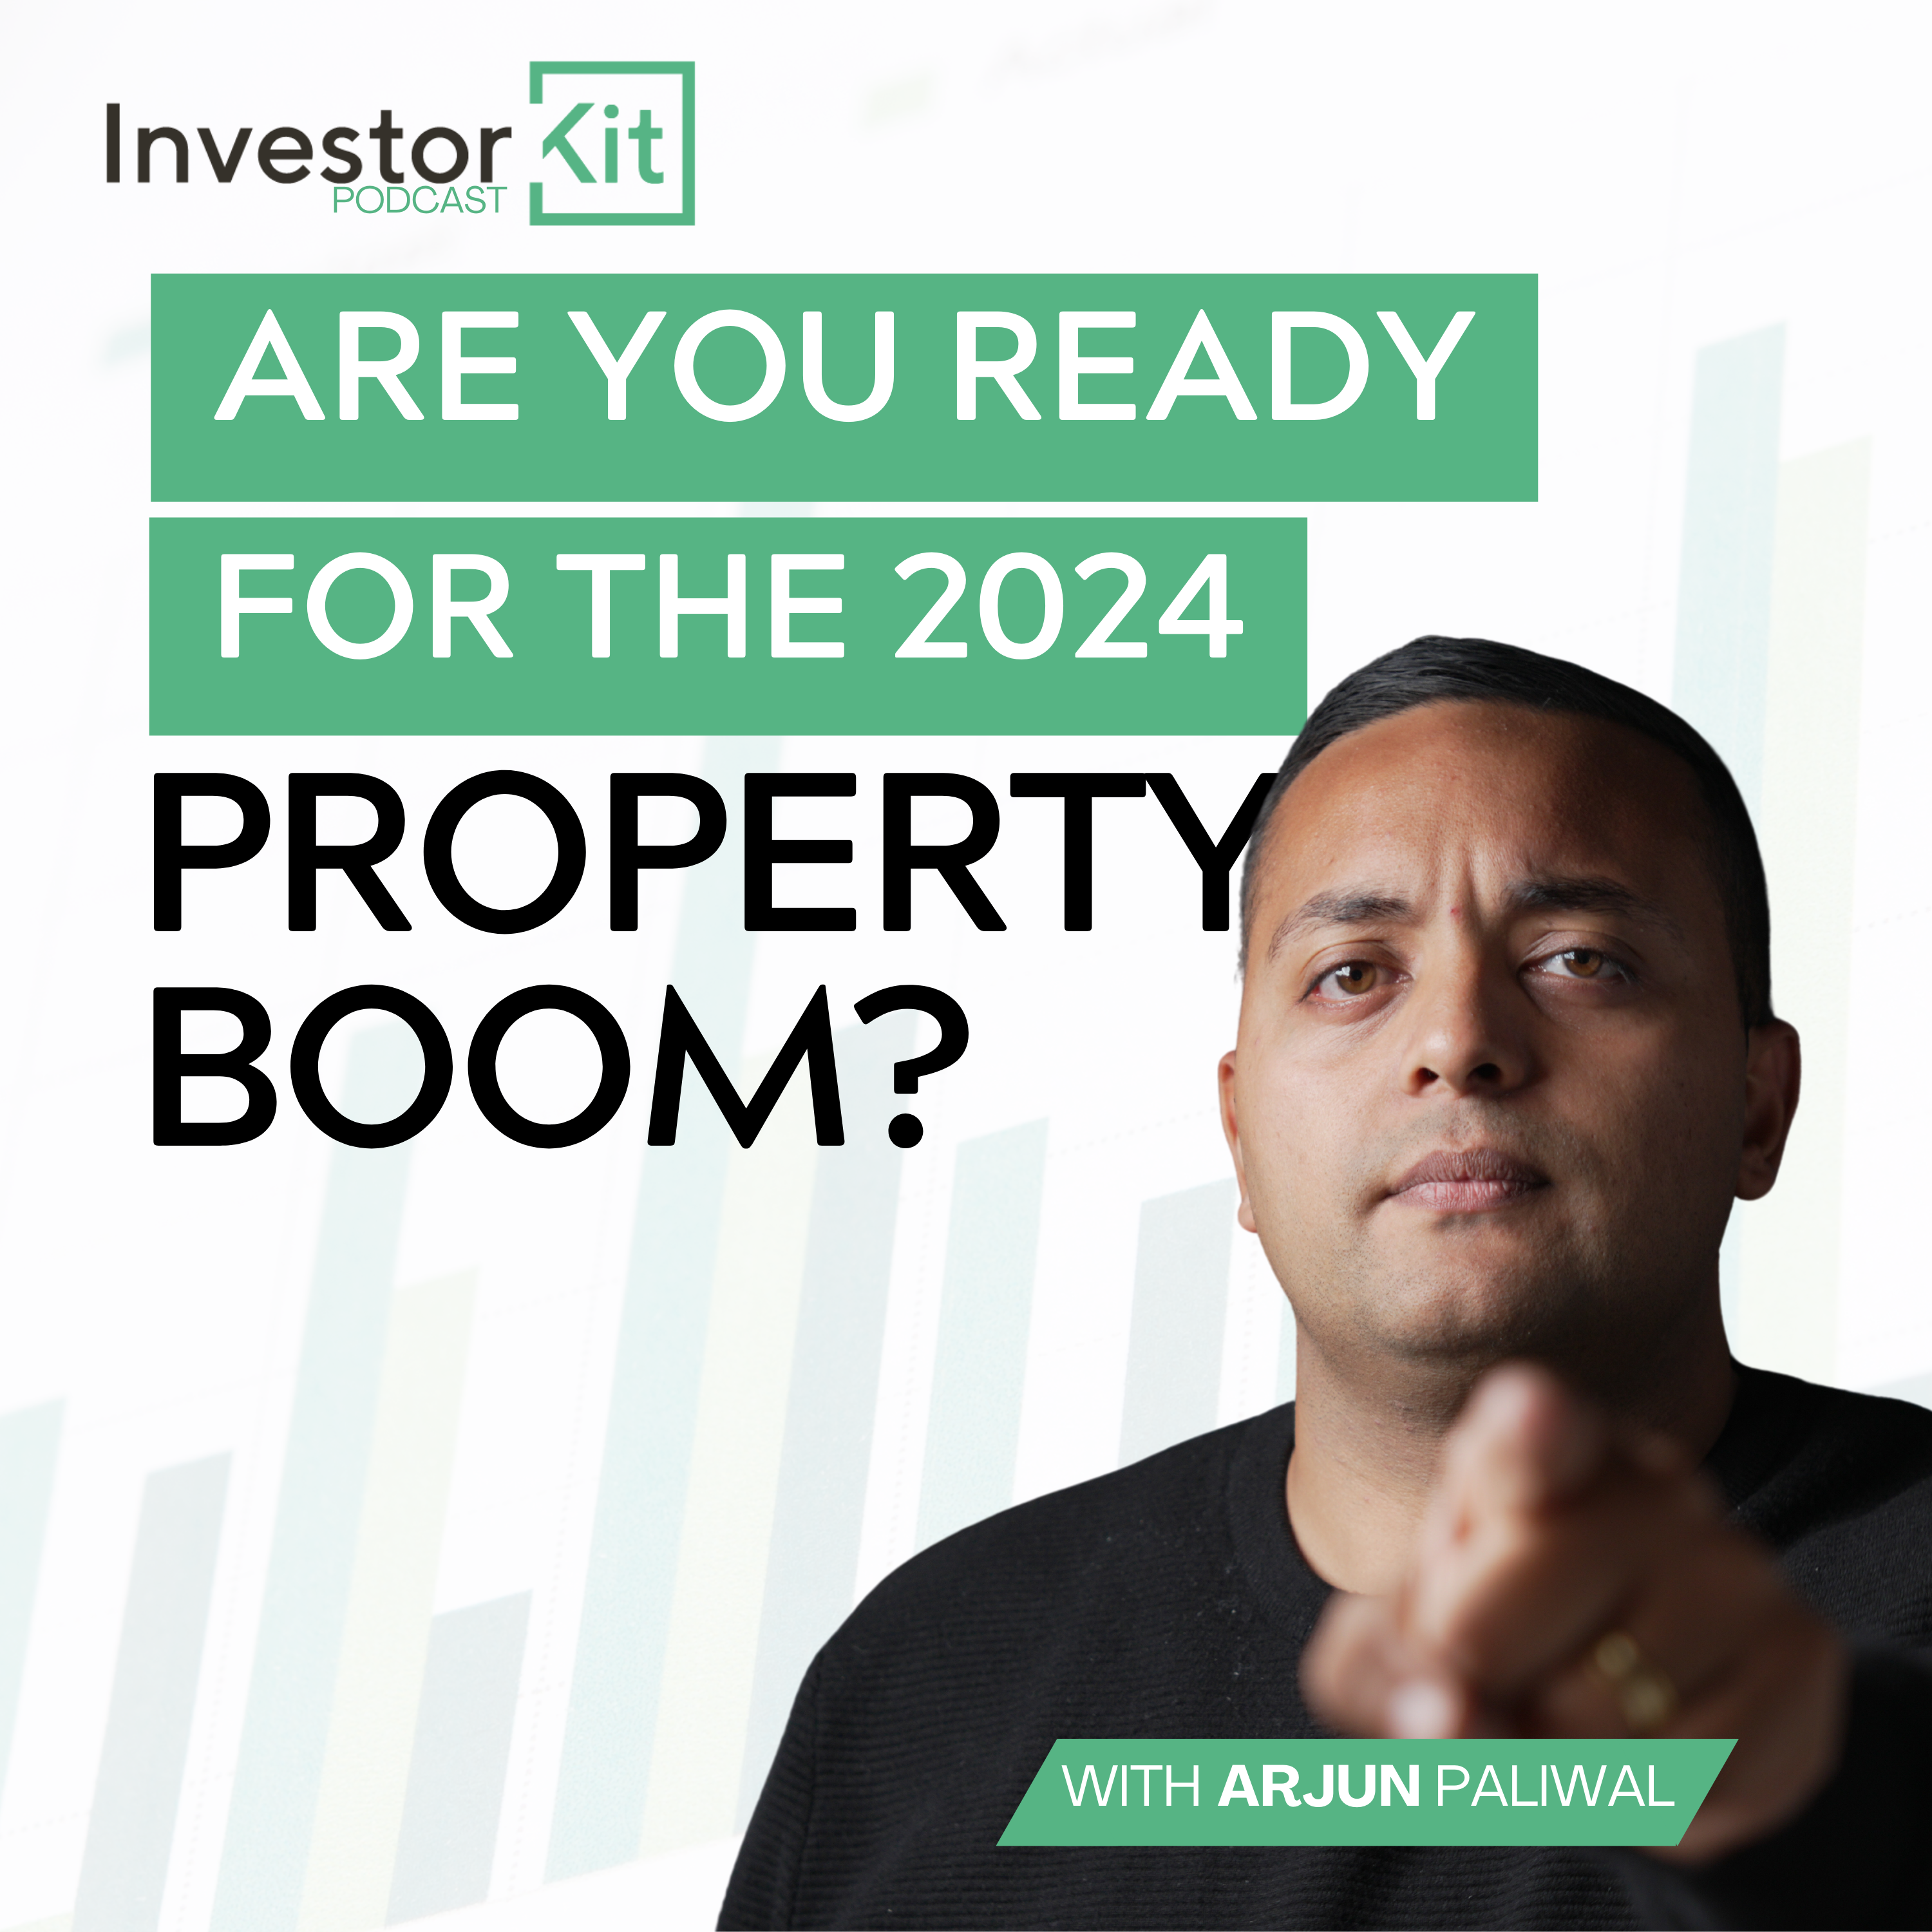 Are You Ready for the 2024 BOOM? Everything You Need to Know!